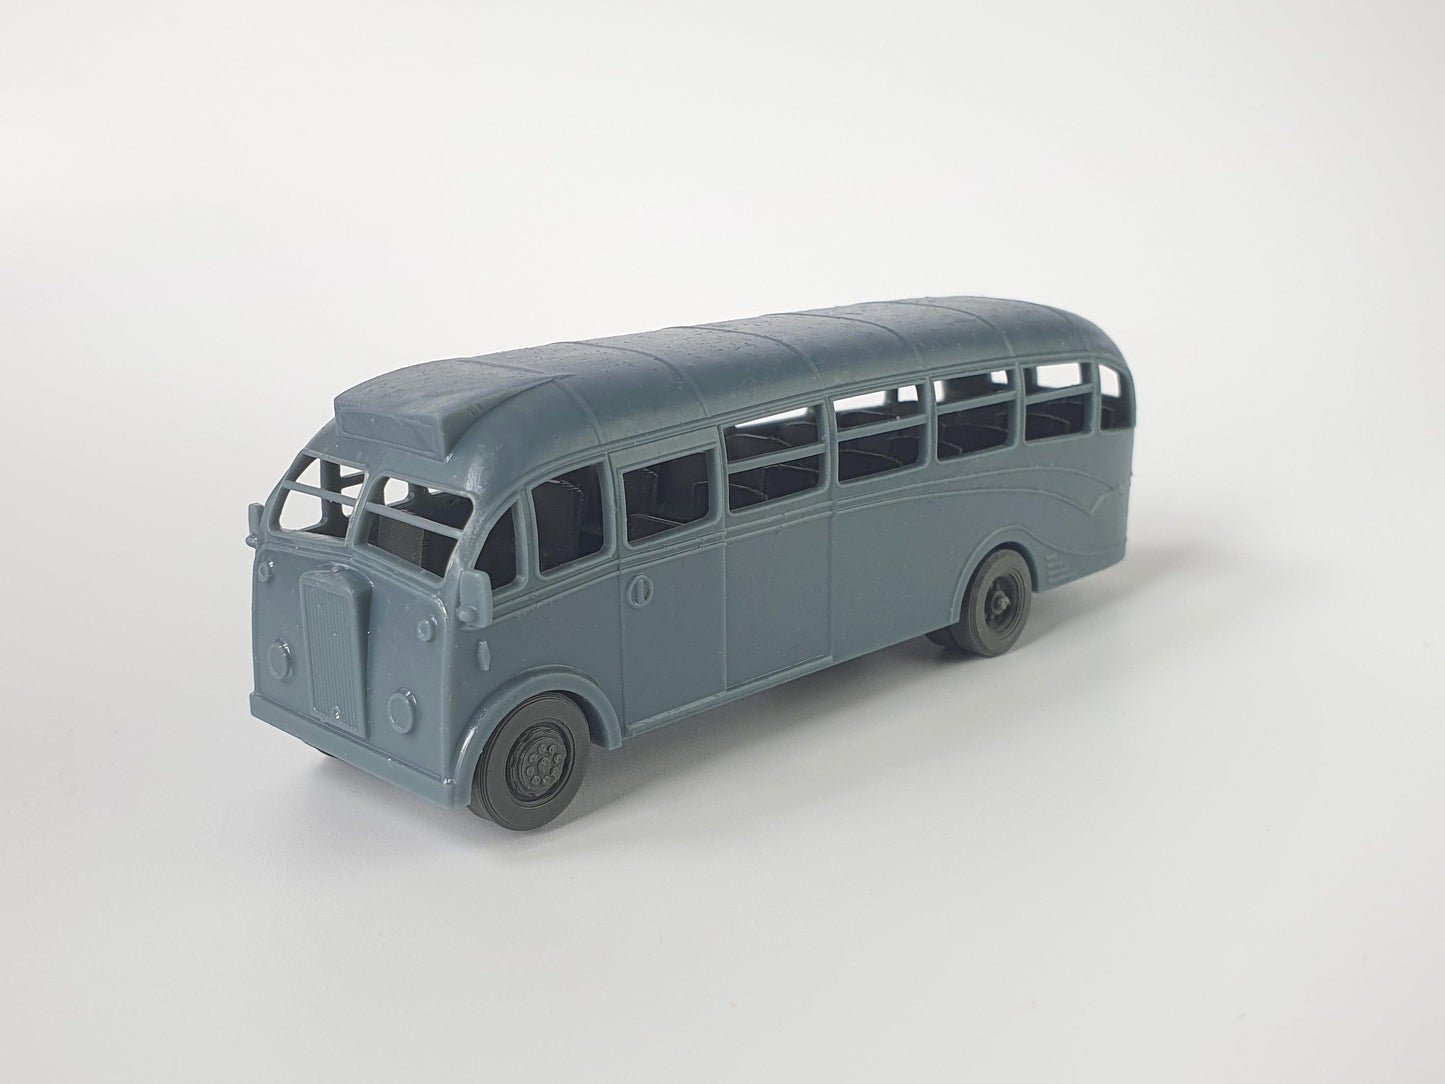 Front view of OO (1:76) scale model Albion Victor bus - Three Peaks Models